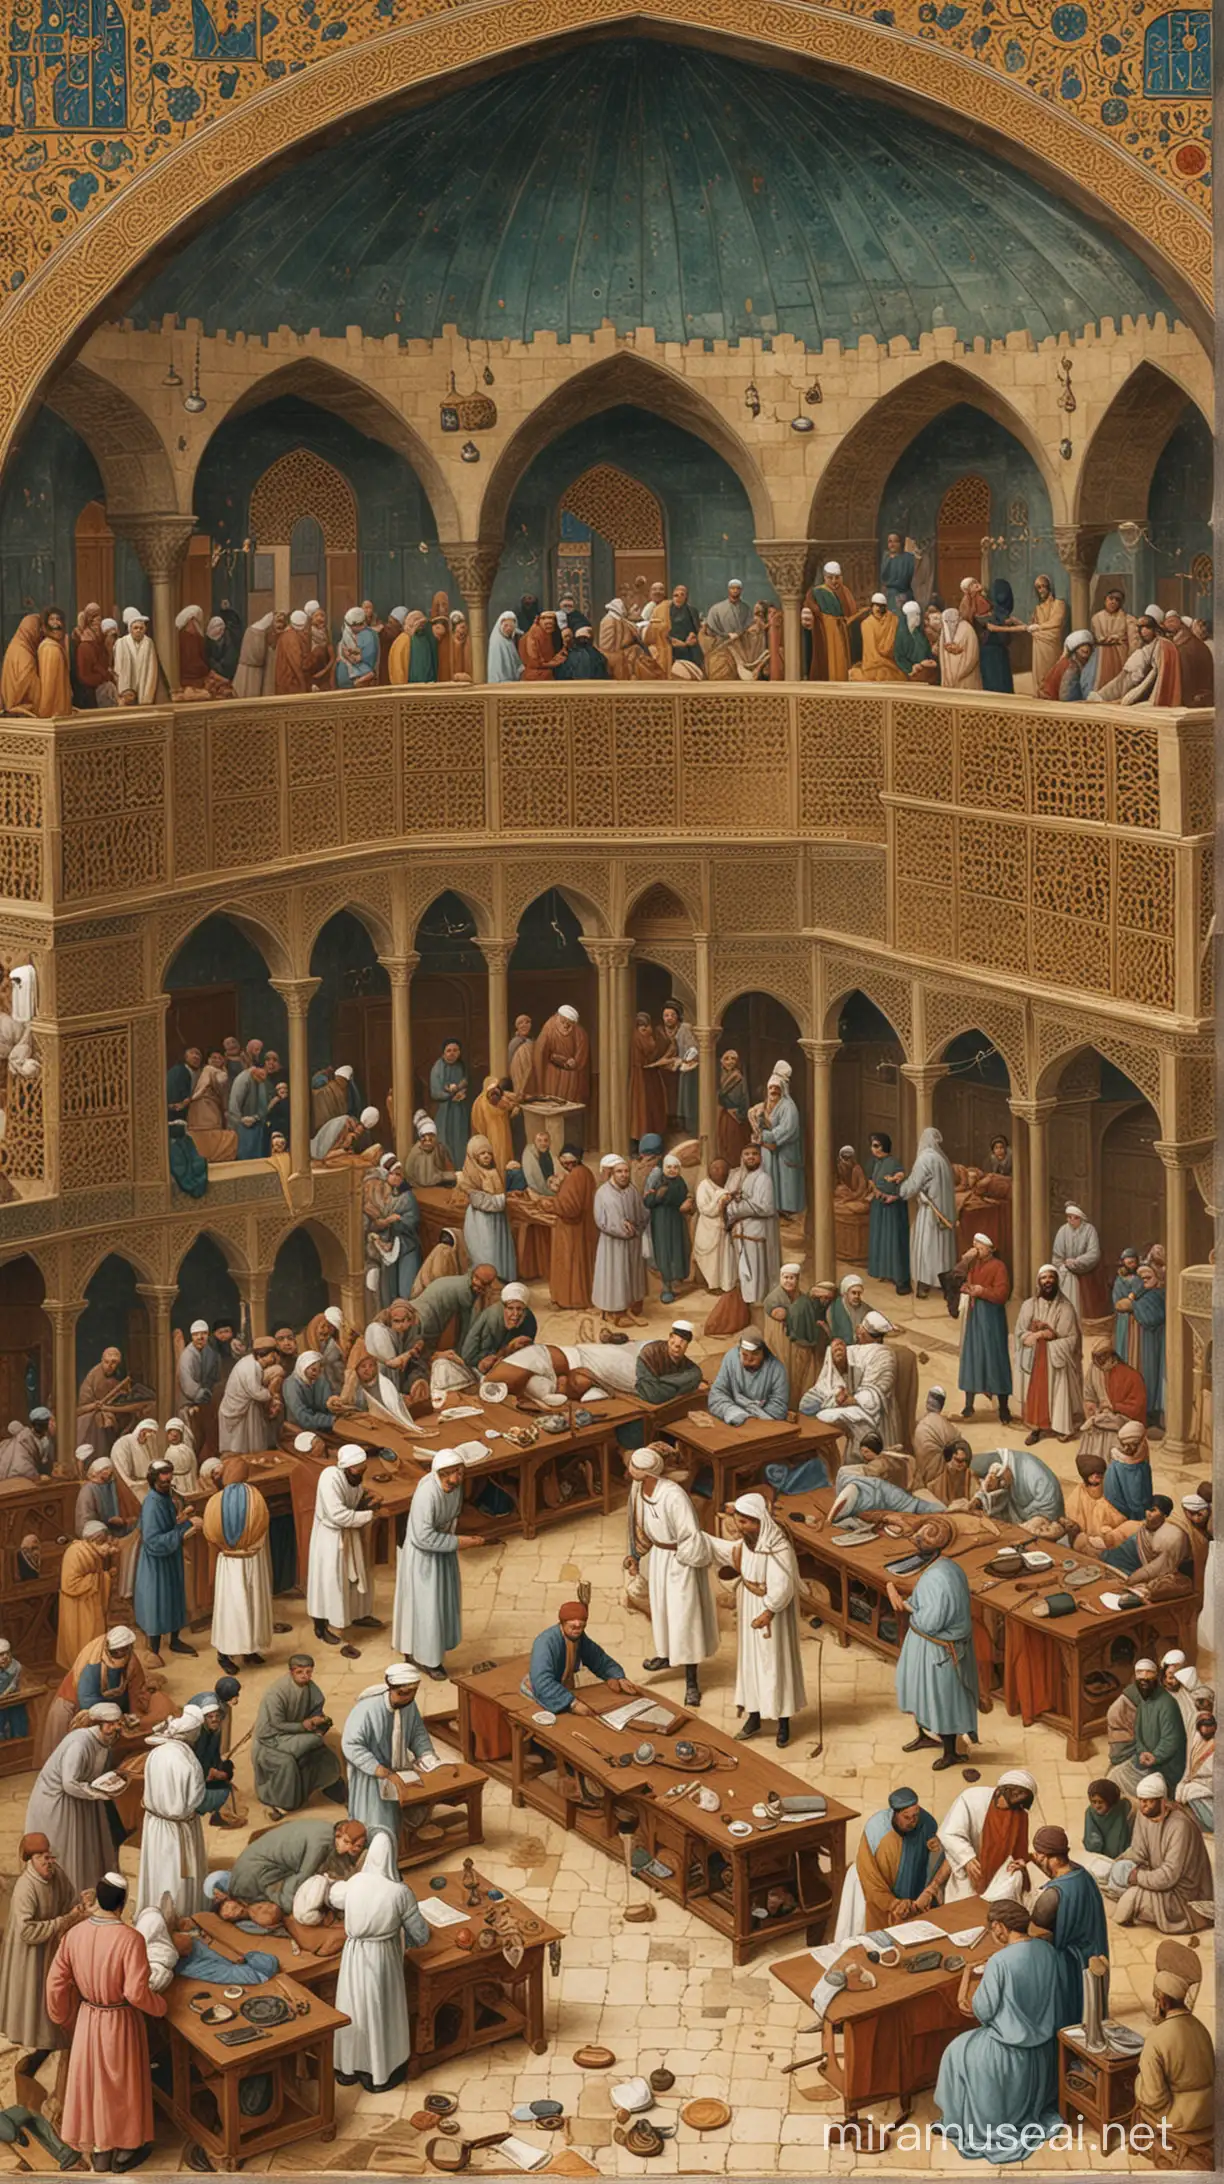 A depiction of a medieval Islamic hospital or medical school, showcasing the pioneering work of Muslim physicians and surgeons in the field of medicine during the Golden Age.